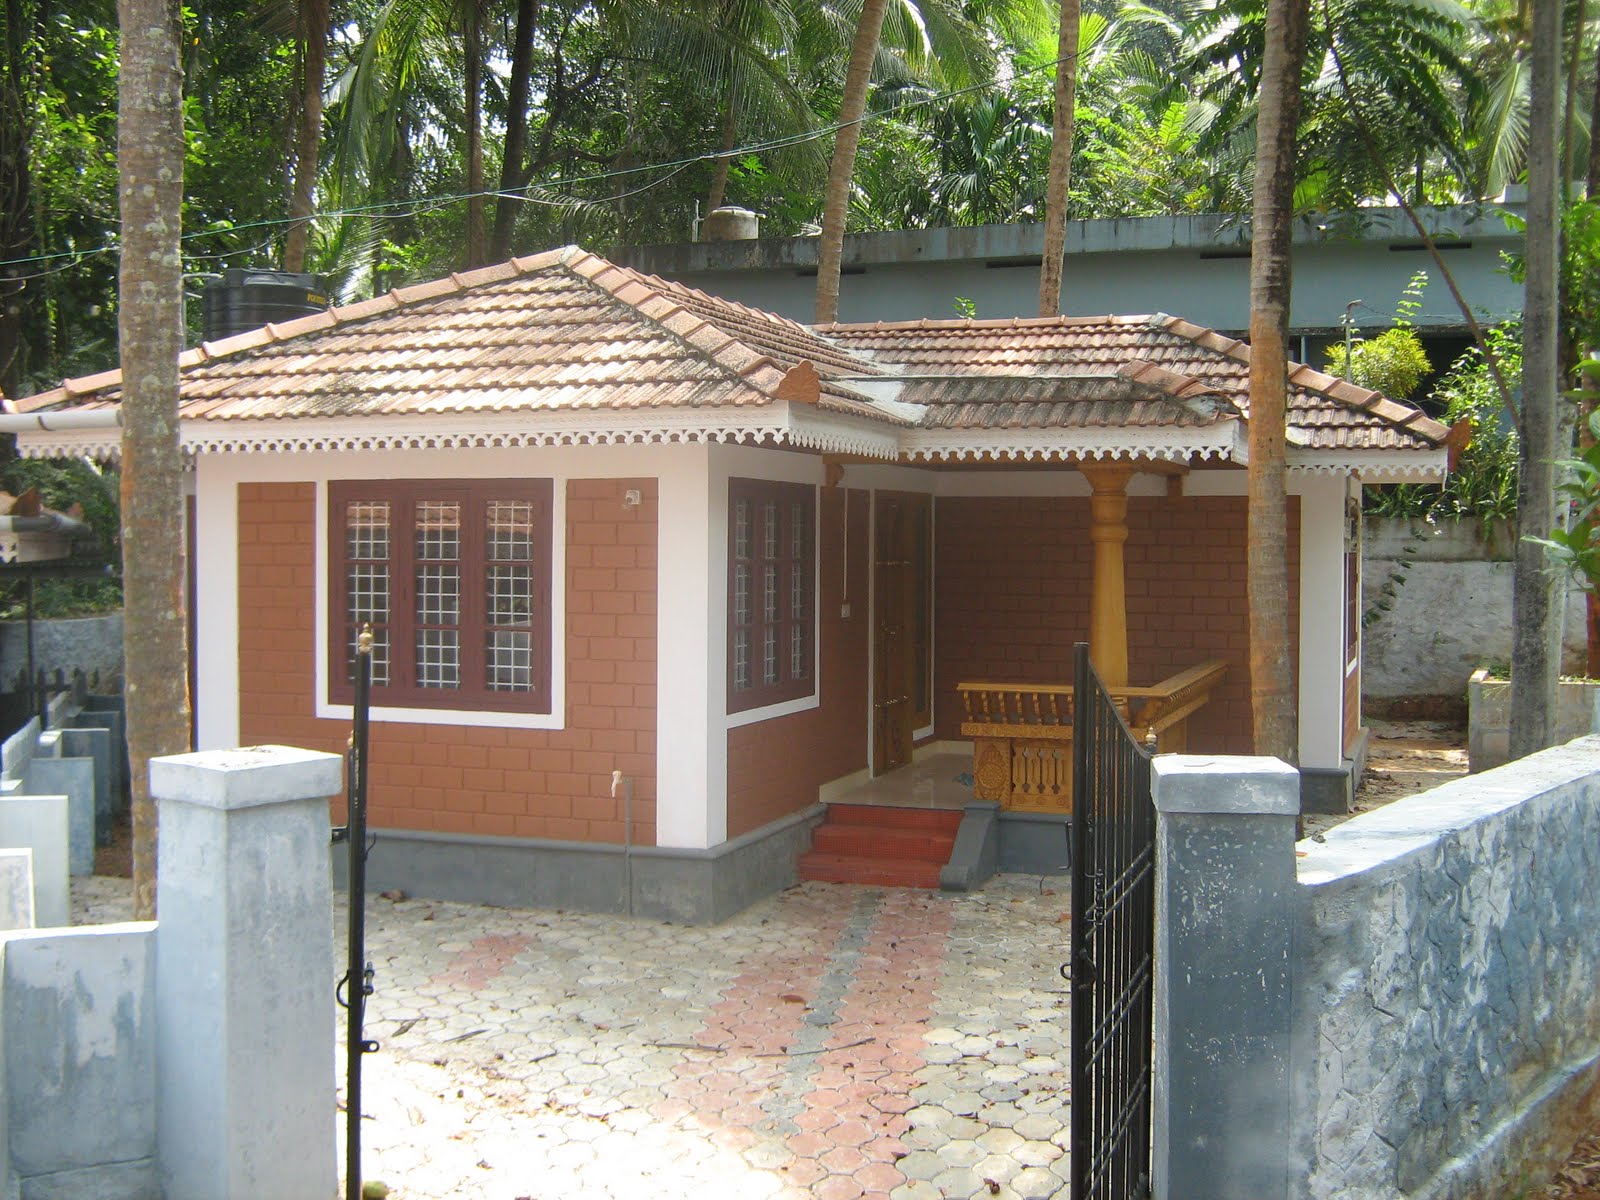  House  Construction Kerala  Low  Cost  House  Construction